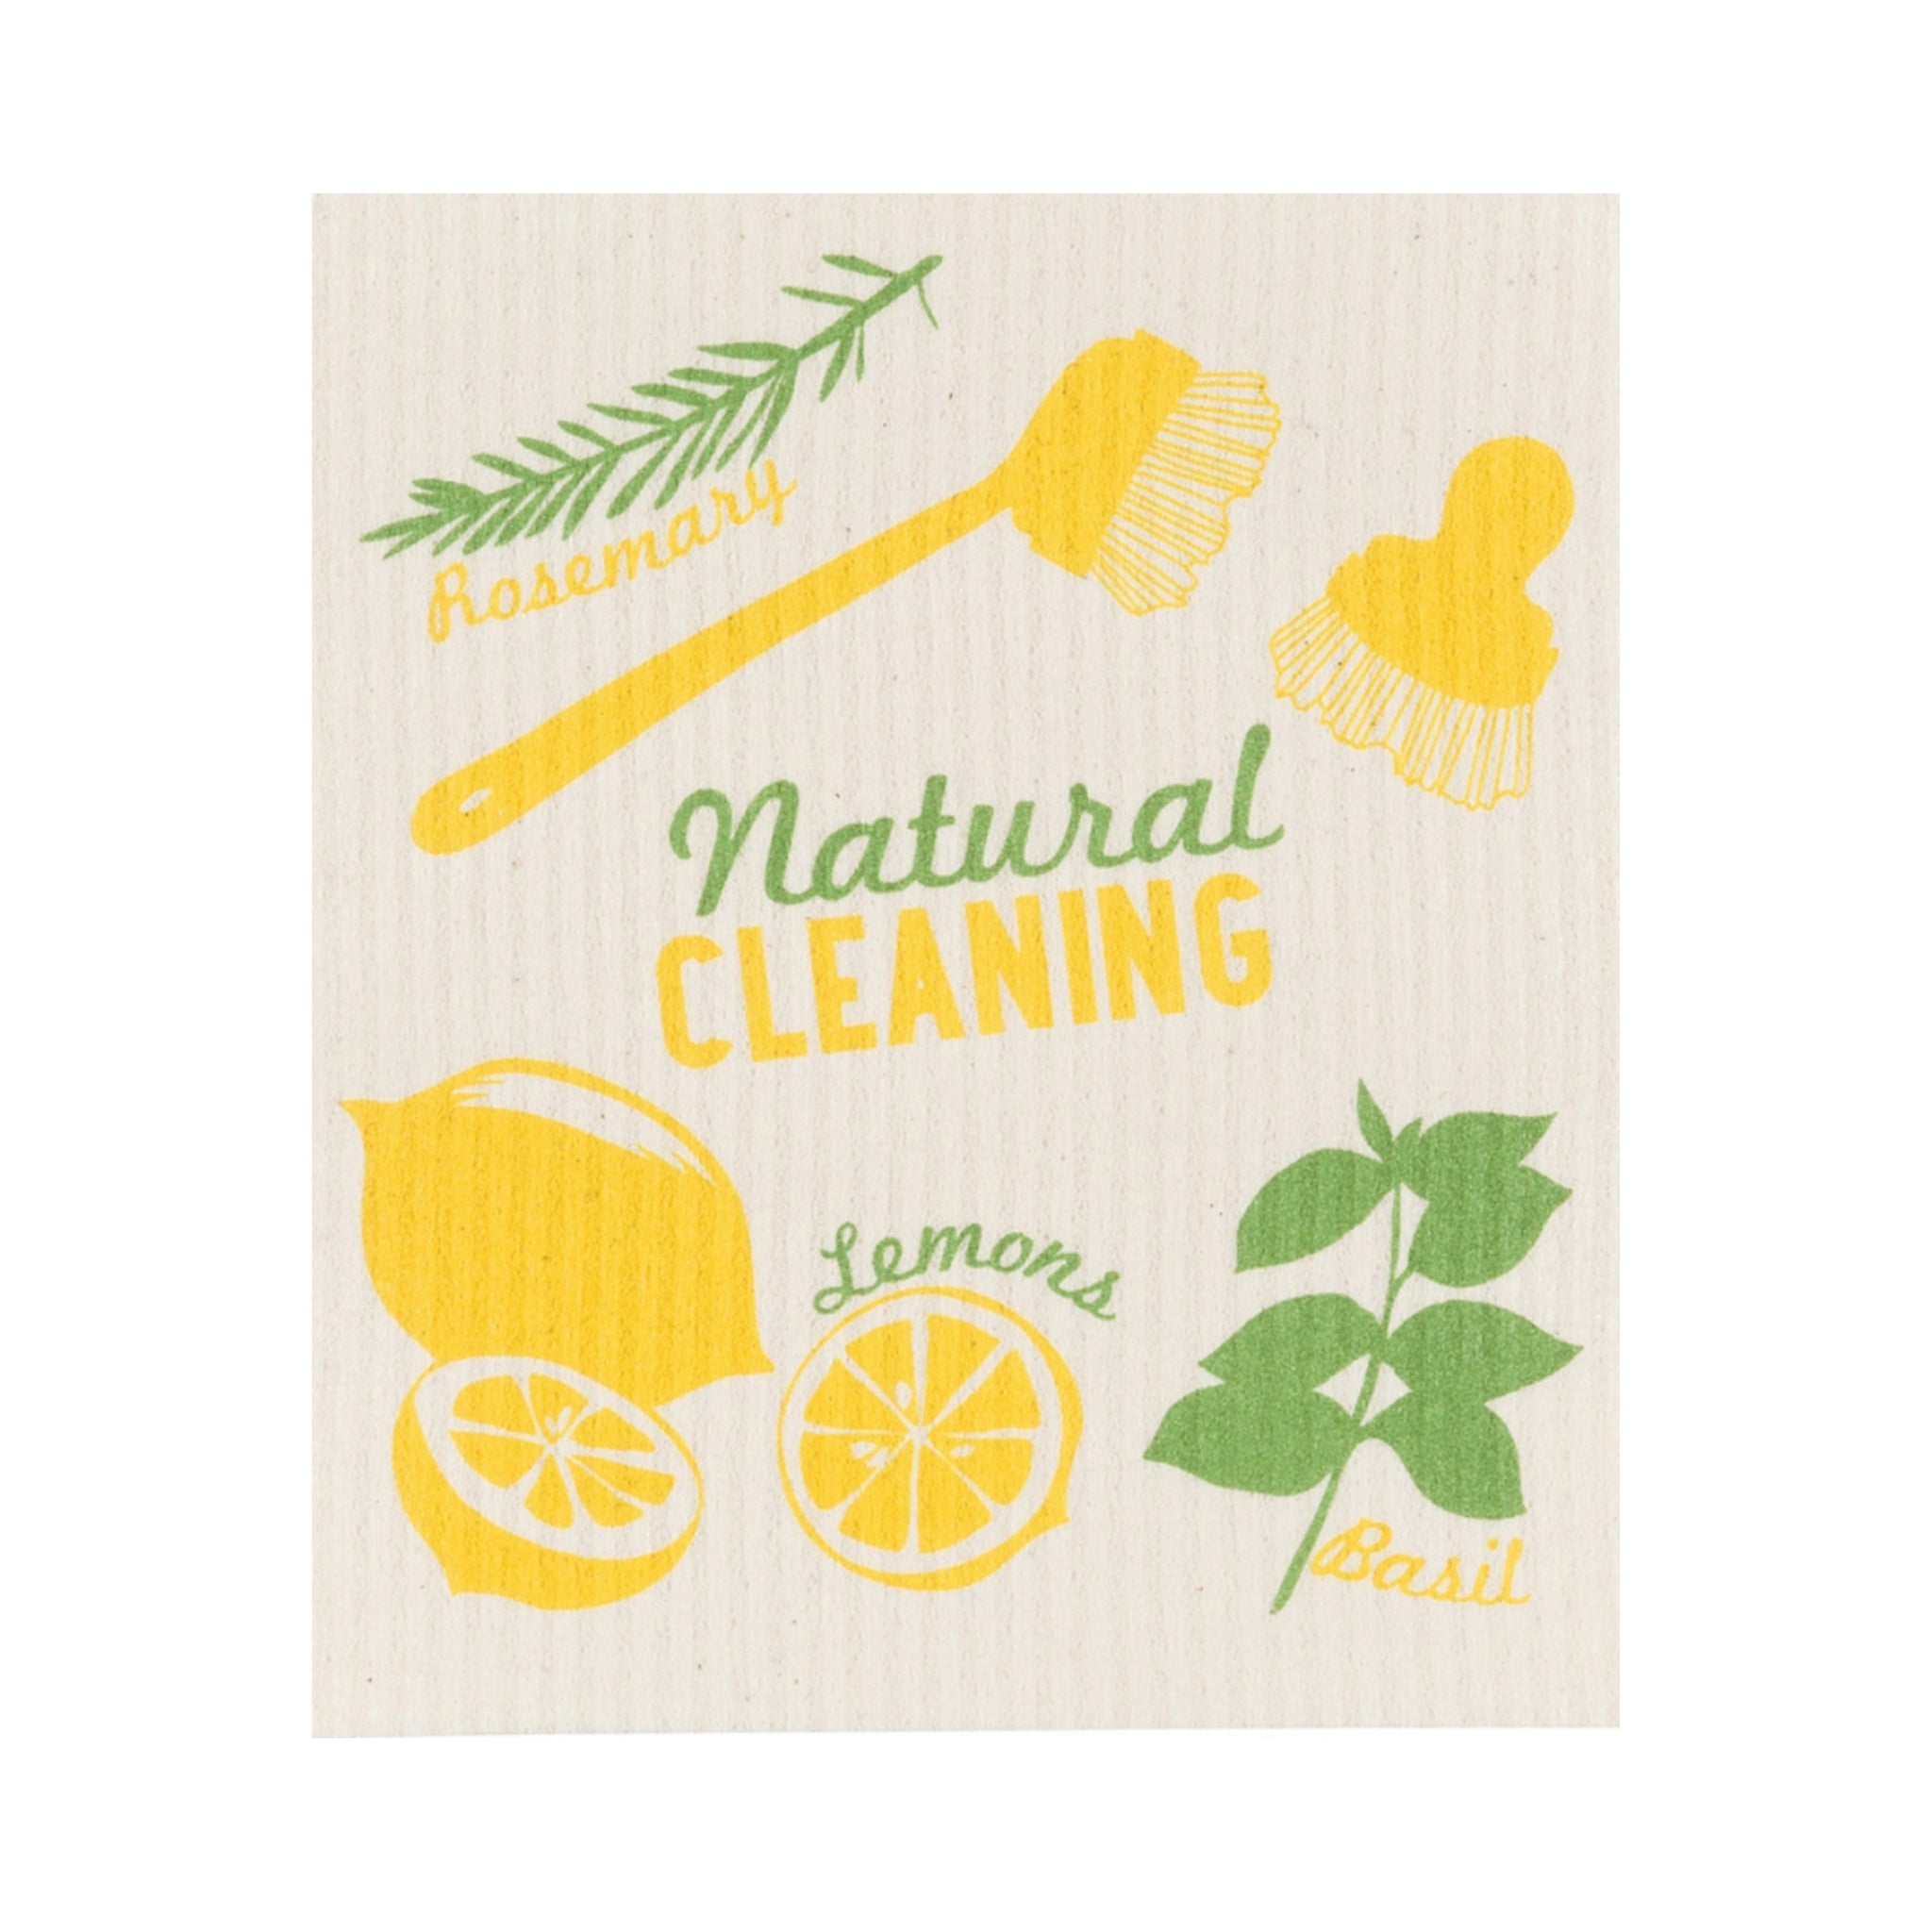 swedish natural cleaning